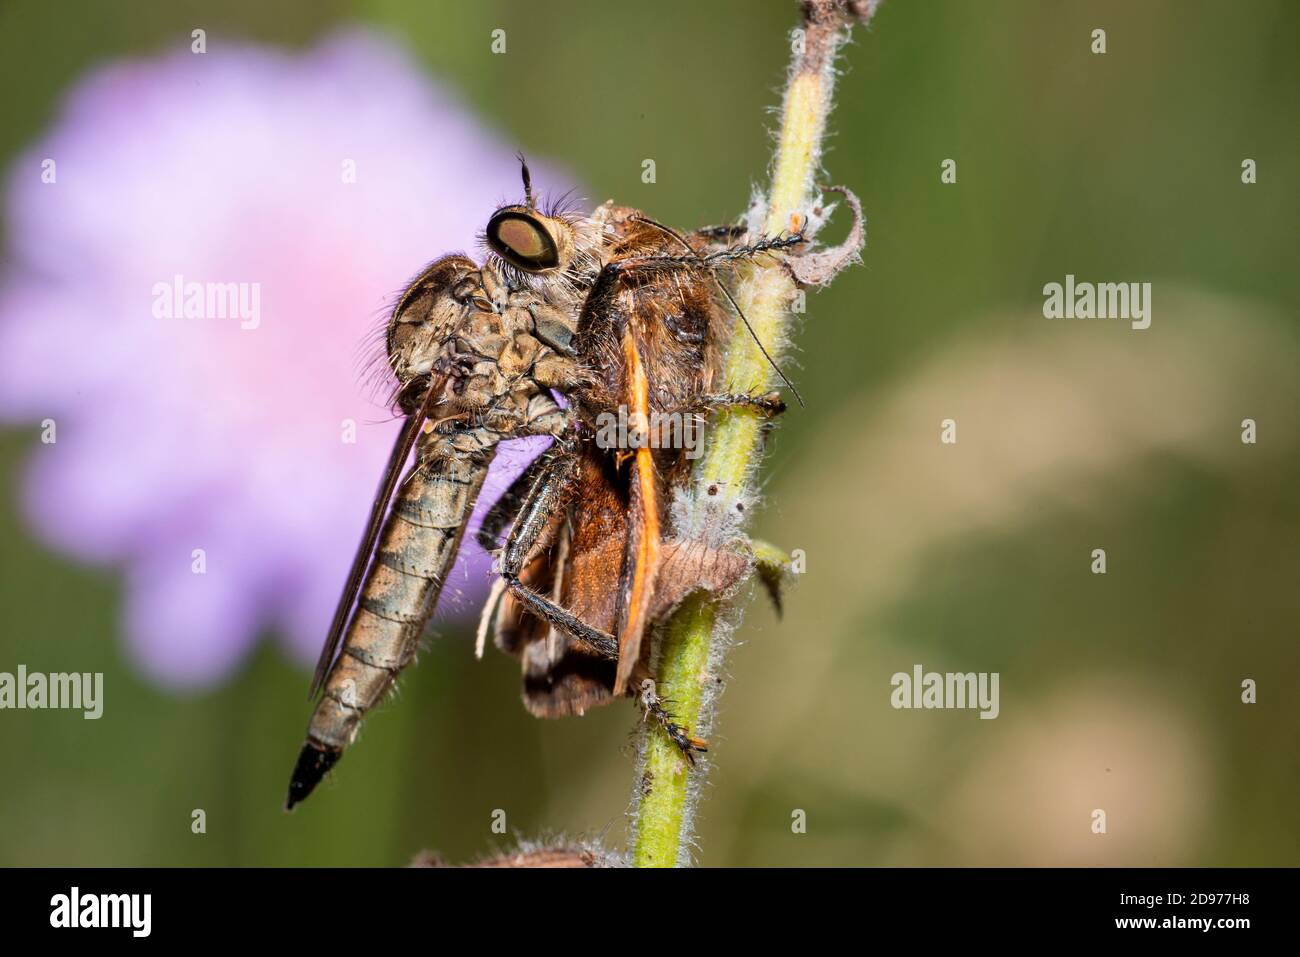 Kite-tailed Robberfly (Tolmerus atricapillus) eating a Burnet companion (Euclidia glyphica), Vosges du Nord Regional Natural Park, France Stock Photo